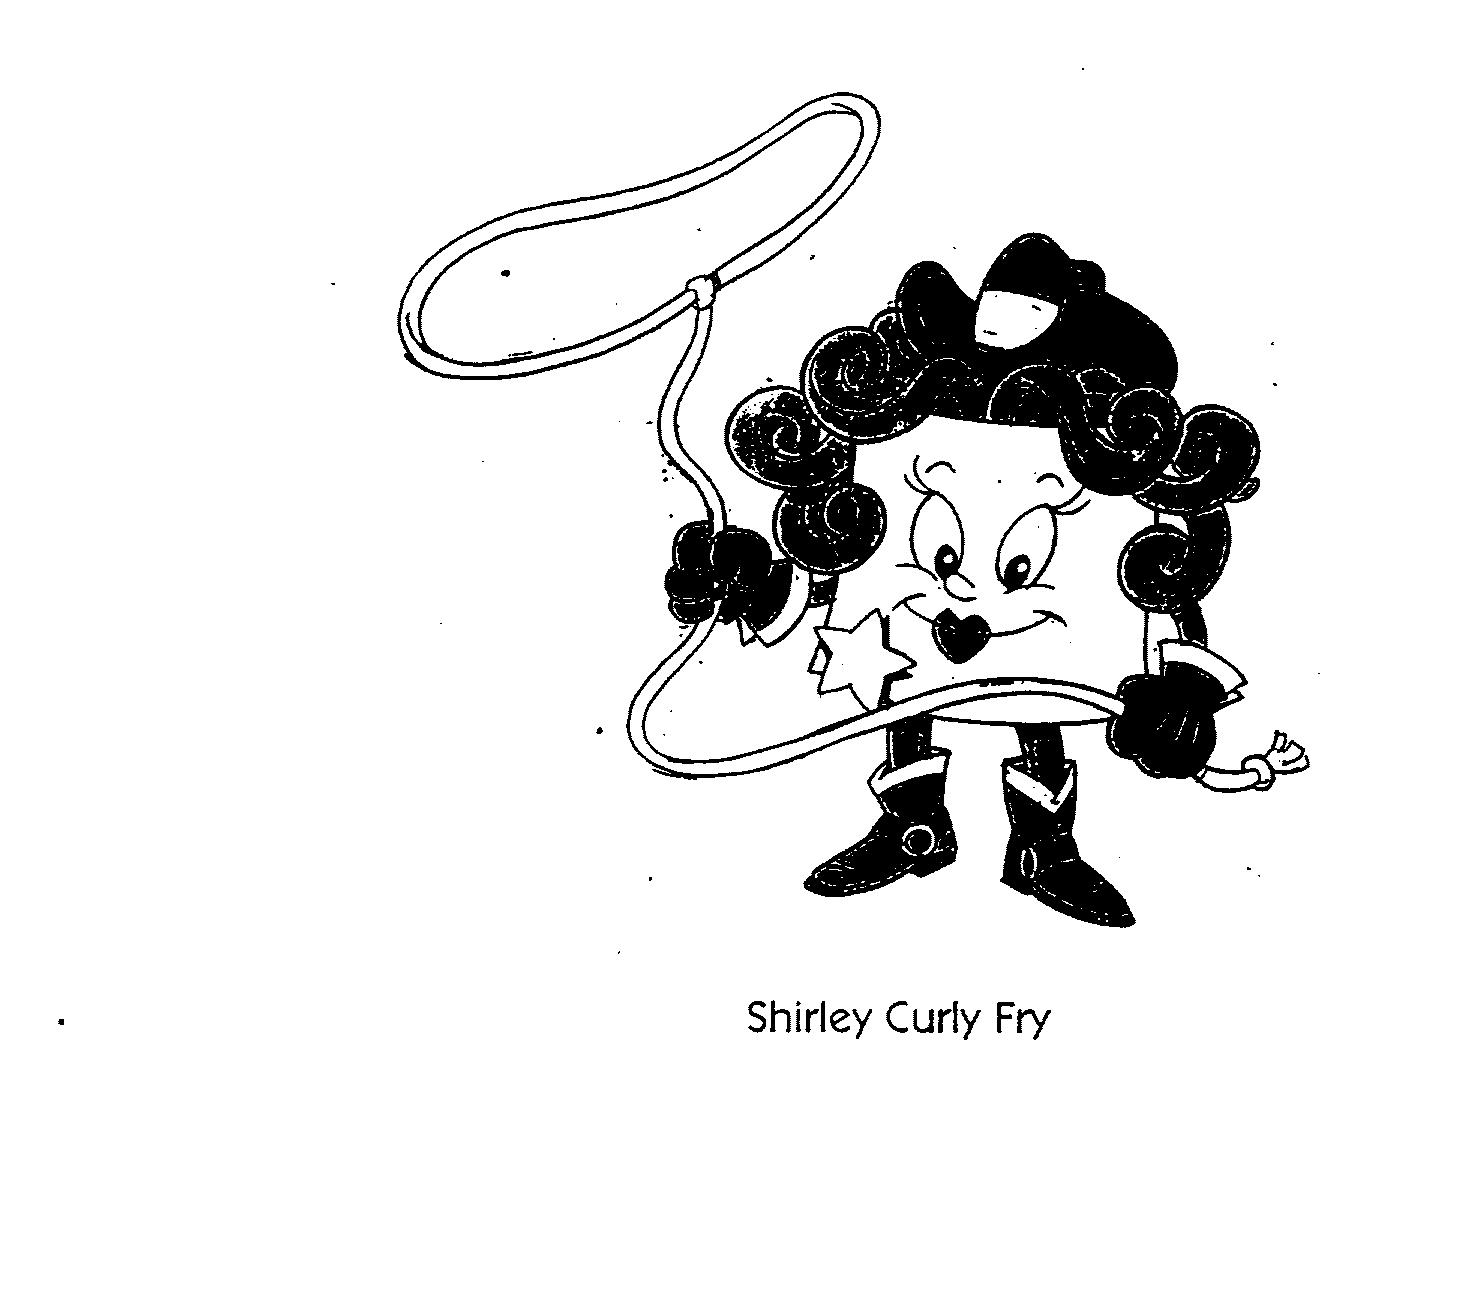  SHIRLEY CURLY FRY